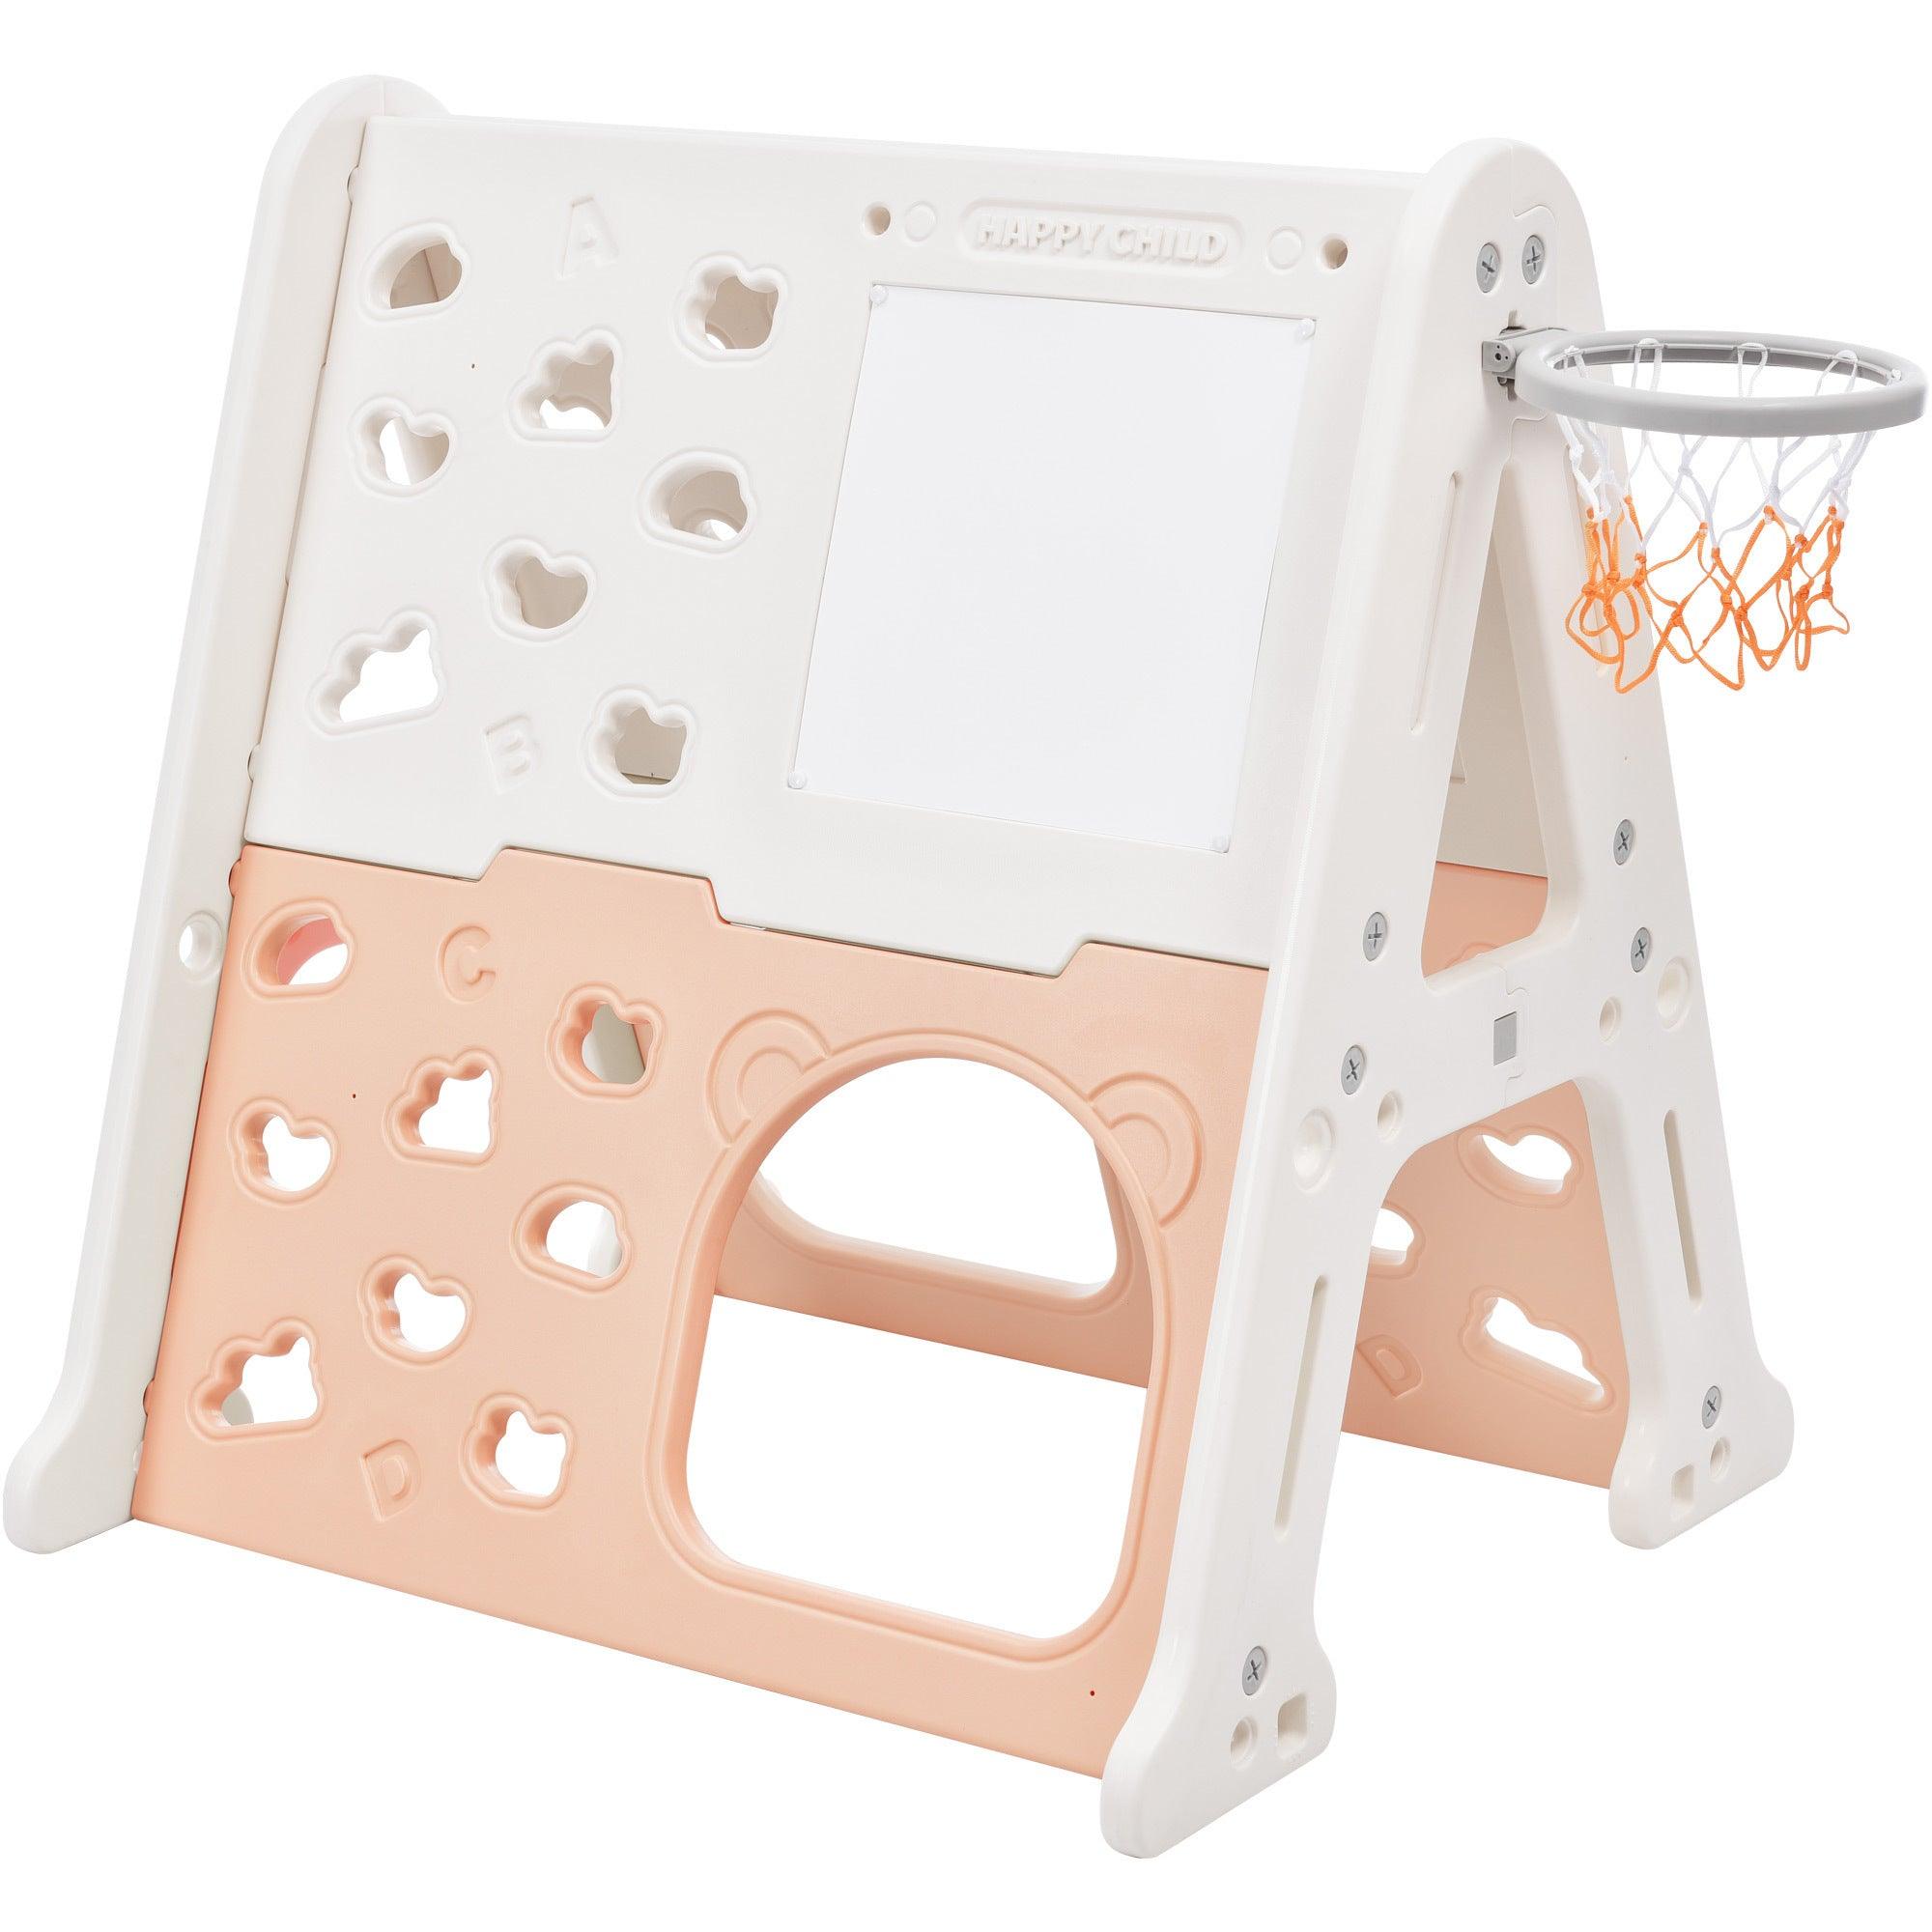 🆓🚛 5-in-1 Toddler Climber Basketball Hoop Set Kids Playground Playset With Tunnel, Climber, Whiteboard, Toy Building Block Baseplates for Babies, Light Pink